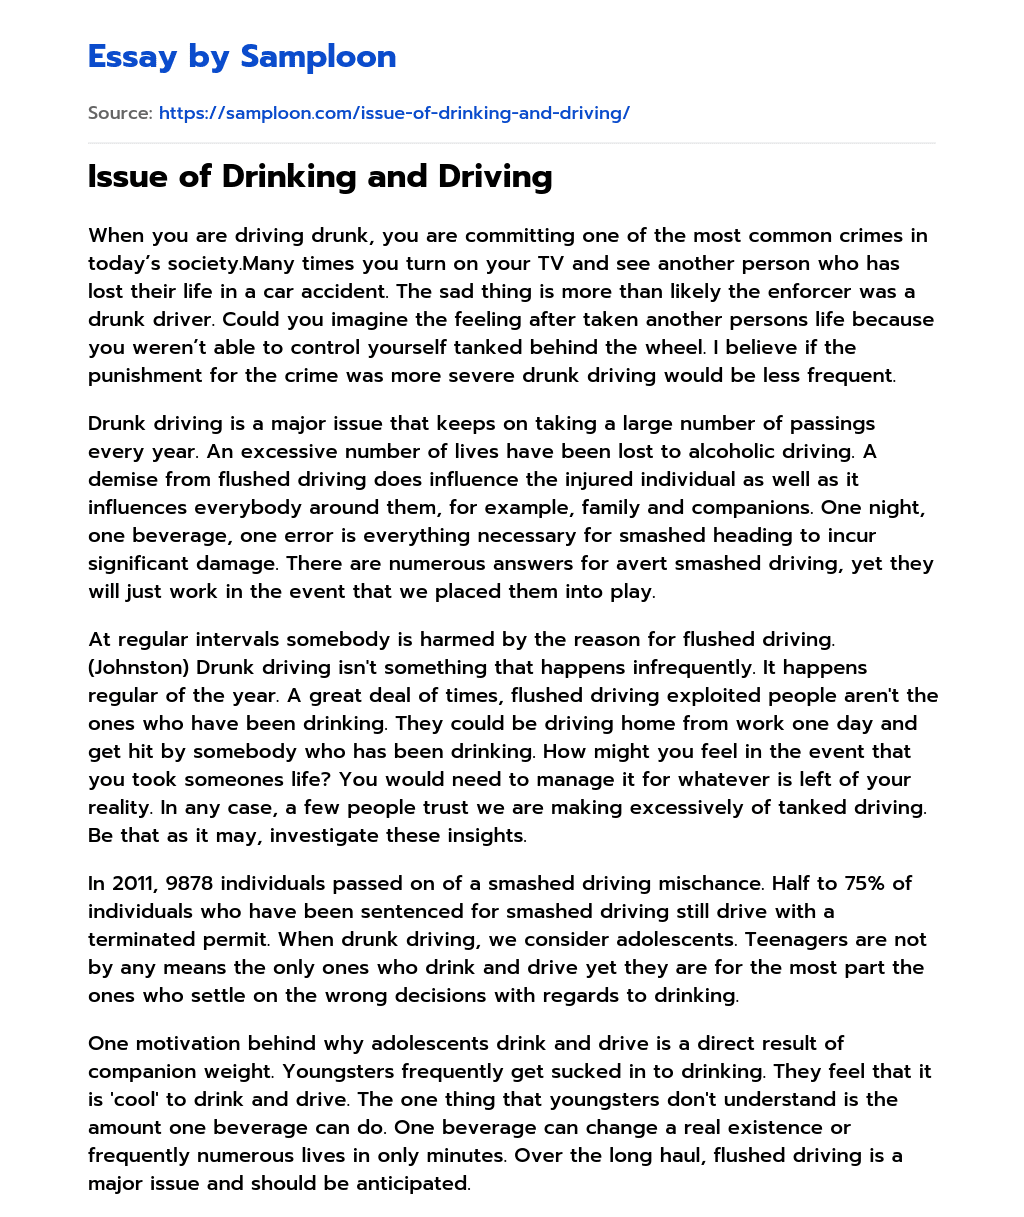 Issue of Drinking and Driving essay